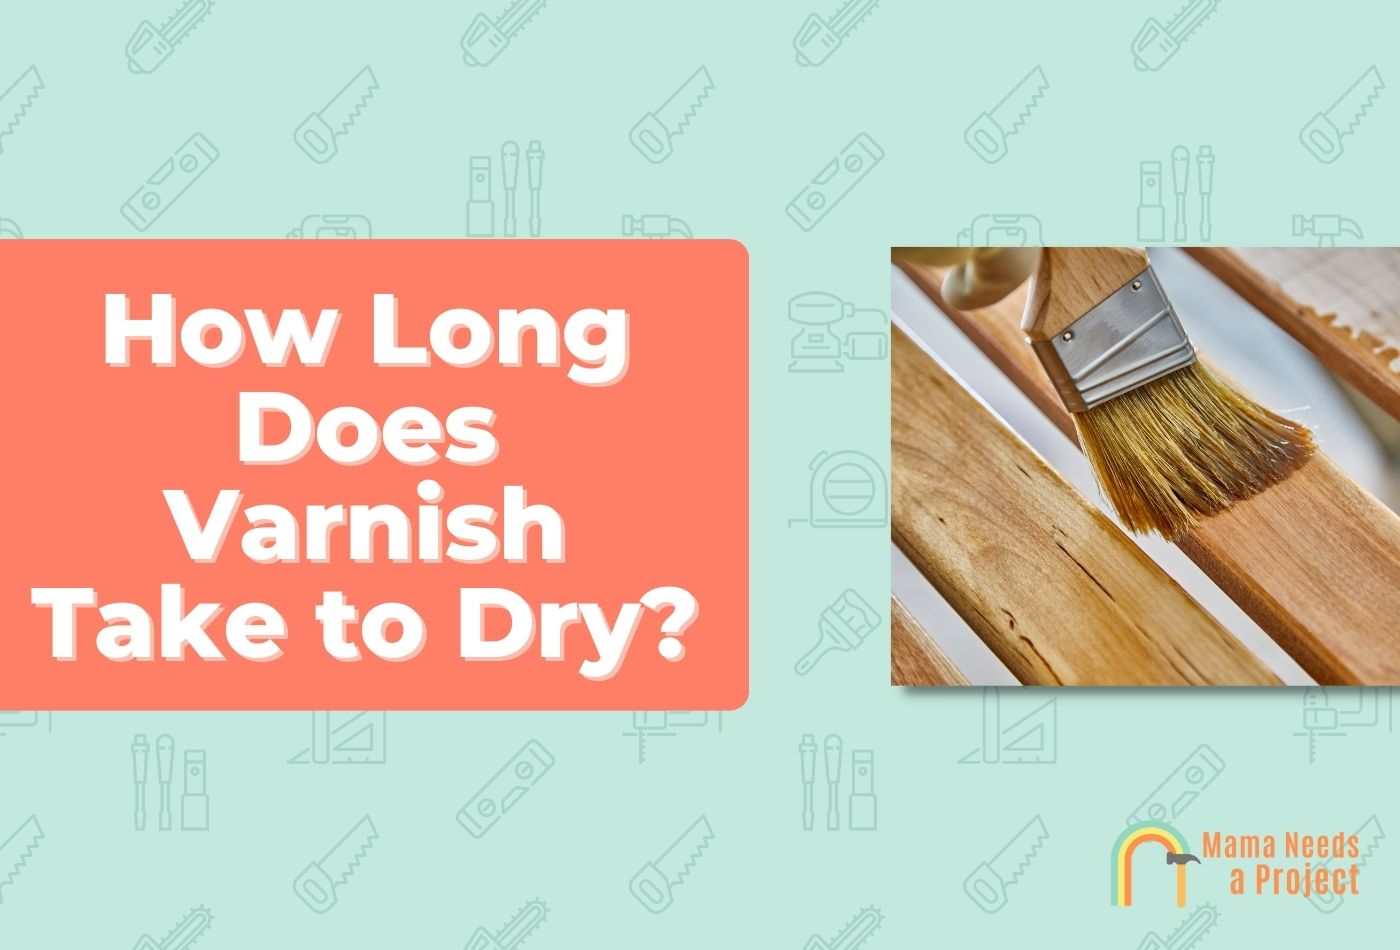 How Long Does Varnish Take to Dry